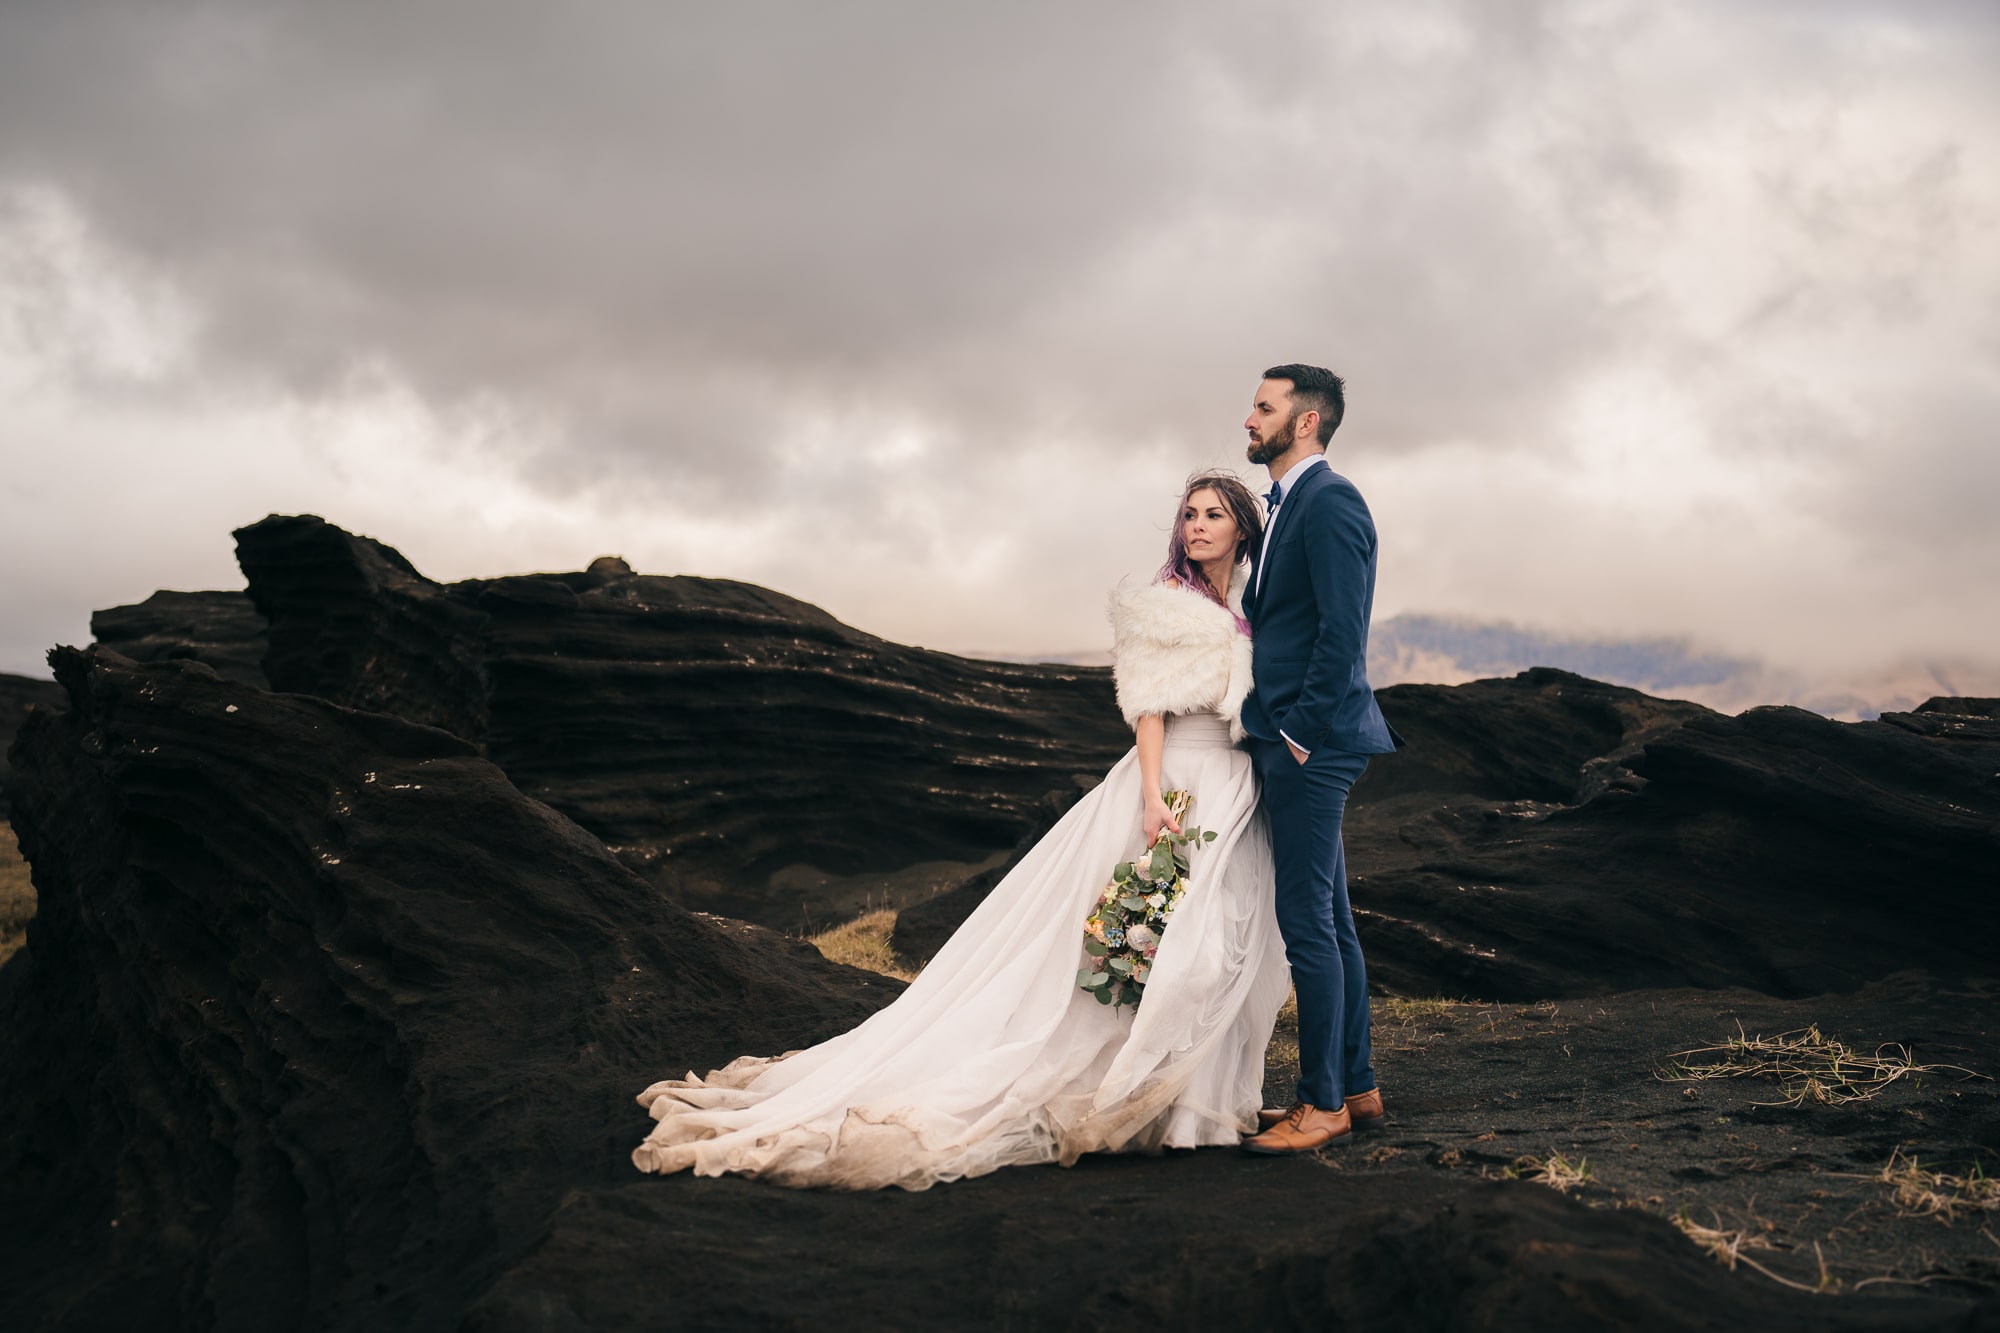 Elopement photo taken at an epic rock formation in Iceland